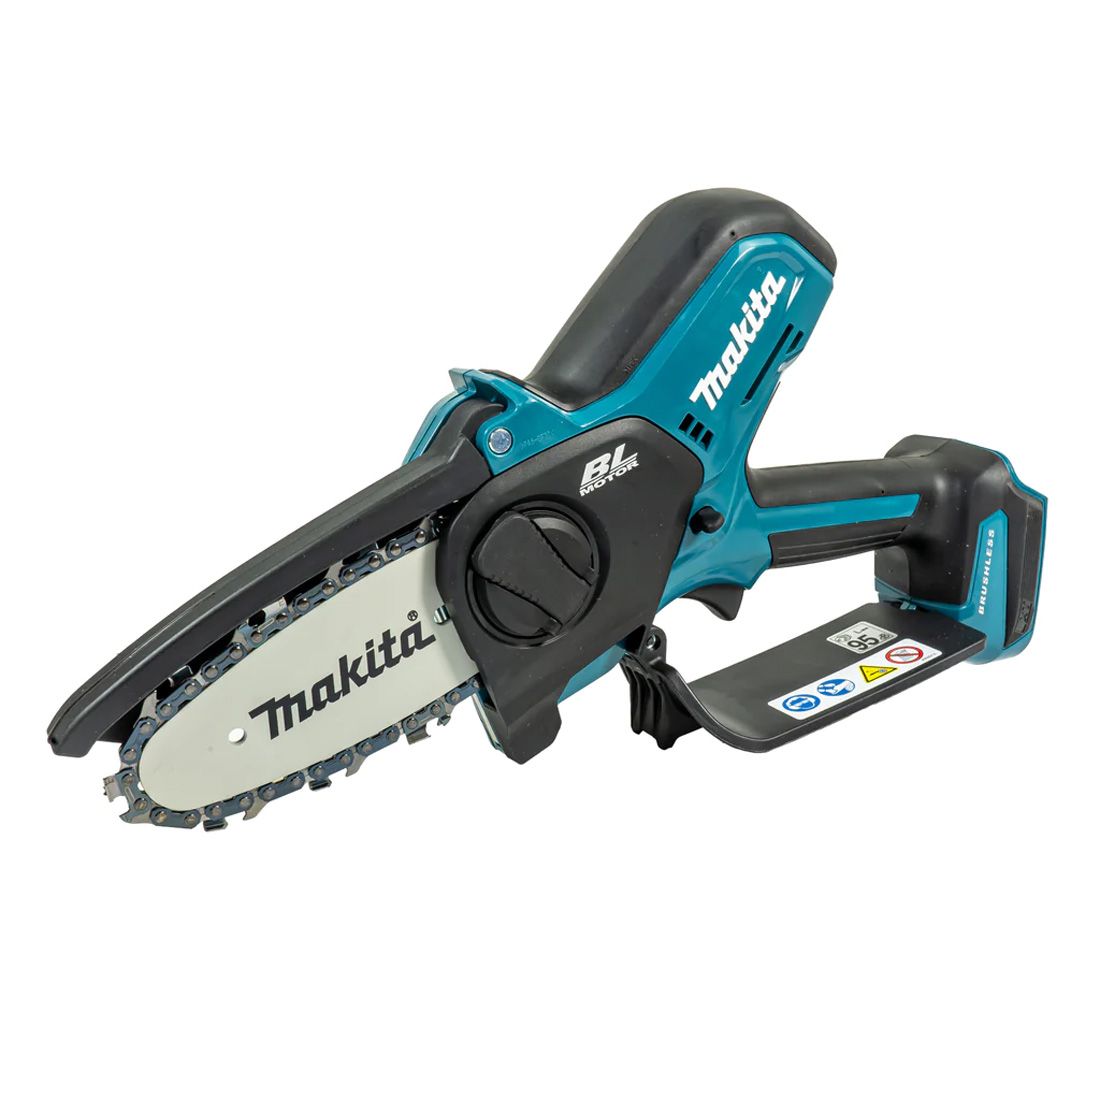 Makita 18v Brushless 4 / 100mm Pruning Saw - DUC150 - Body Only